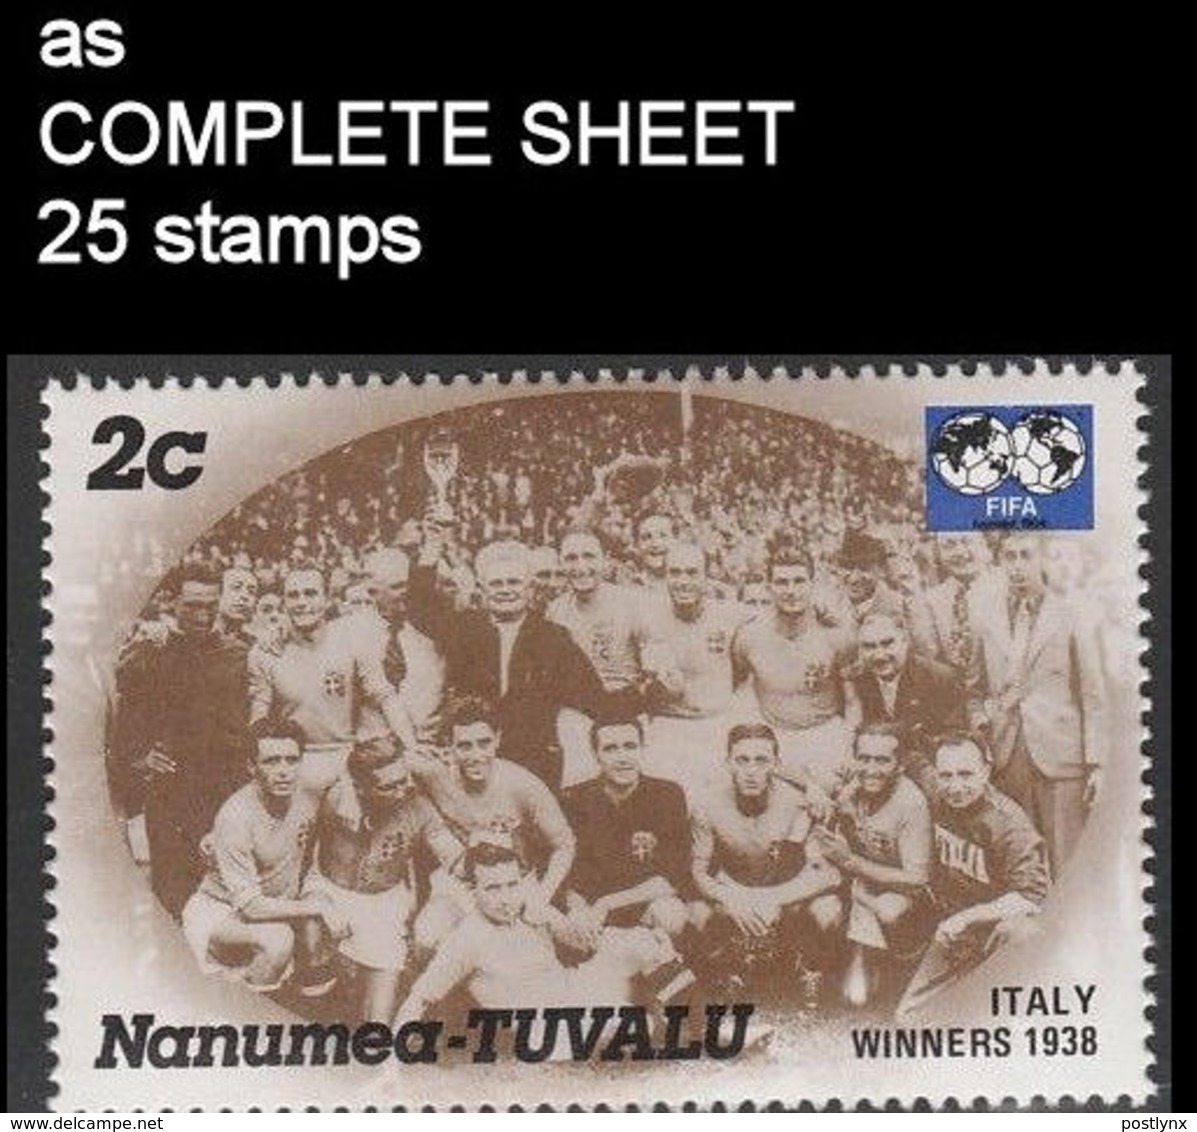 CV:€5.56 TUVALU-Nanumea 1986 World Cup Mexico France Winner Italy 1938 2c COMPLETE SHEET:25 Stamps - 1938 – Francia